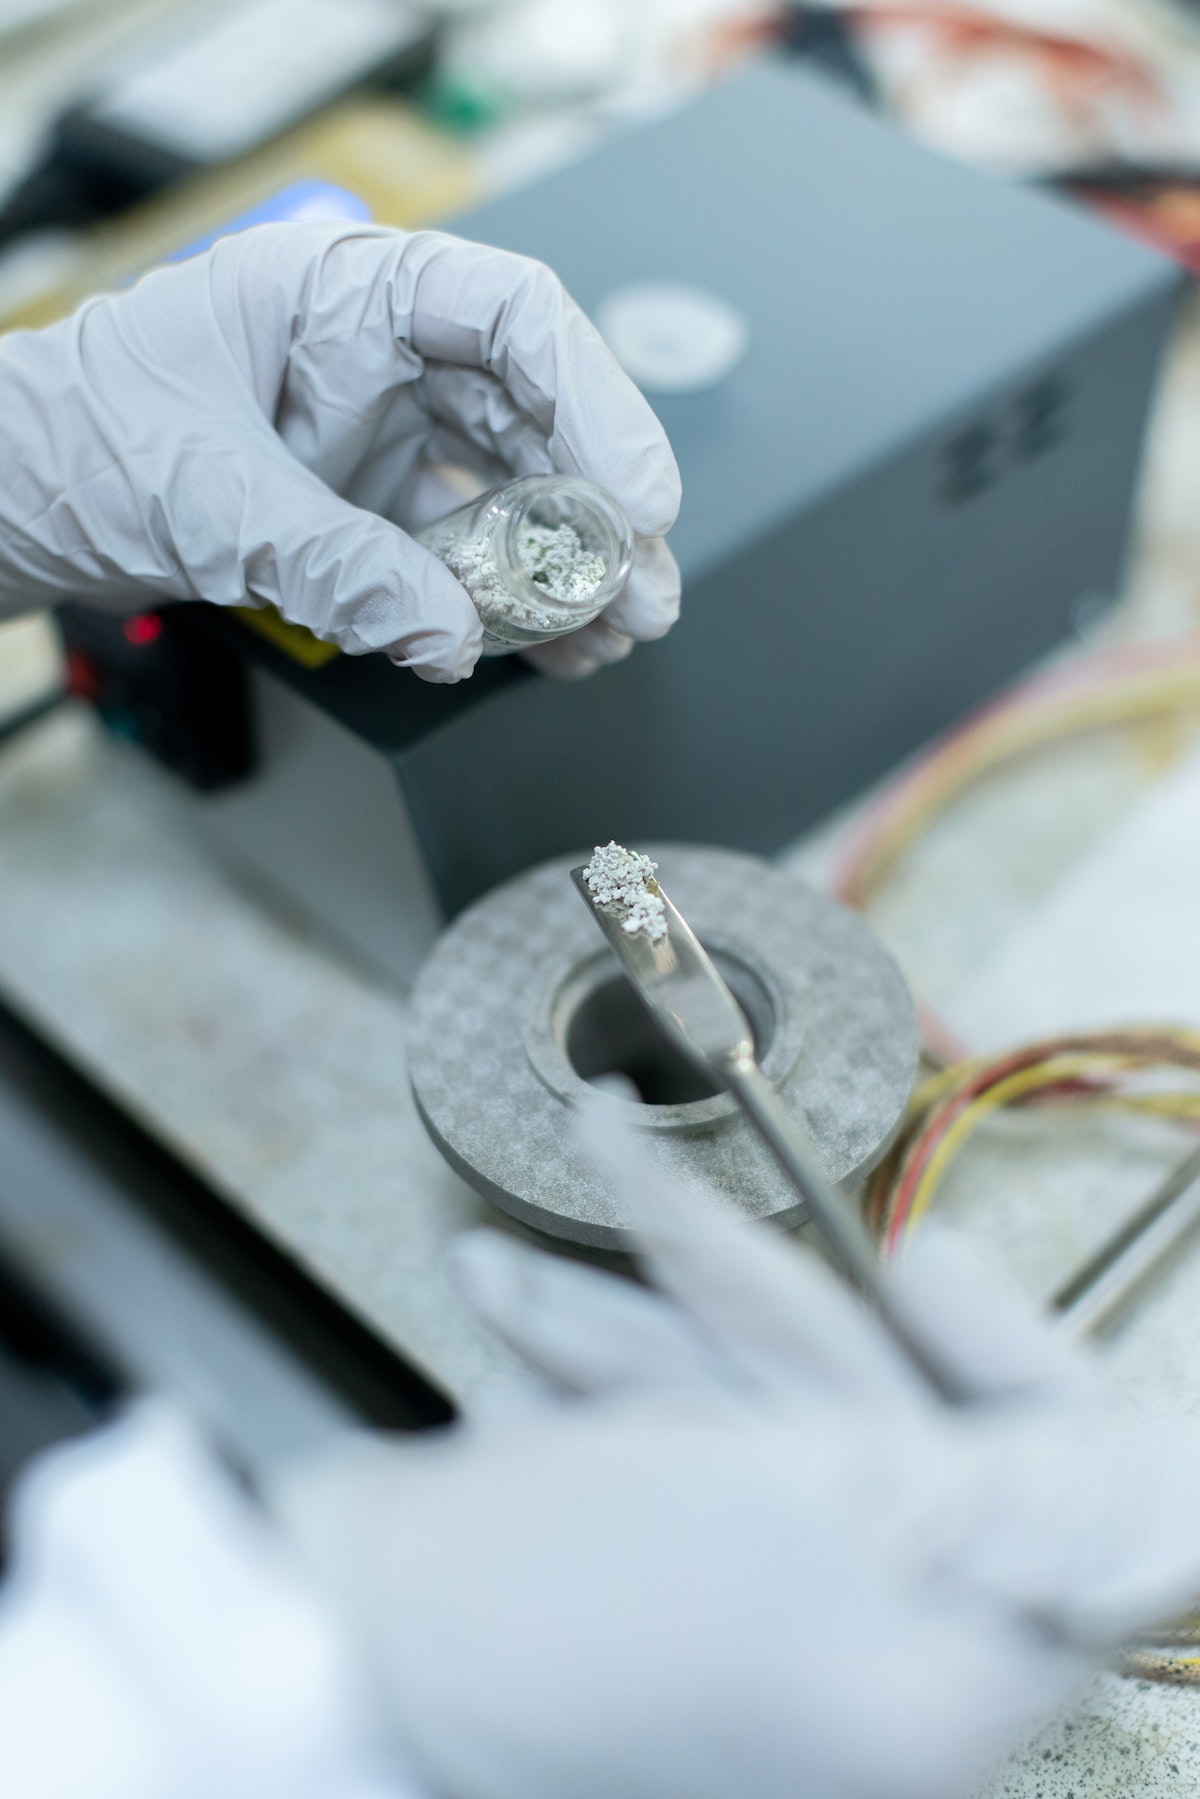 extracted material from a lithium ion battery